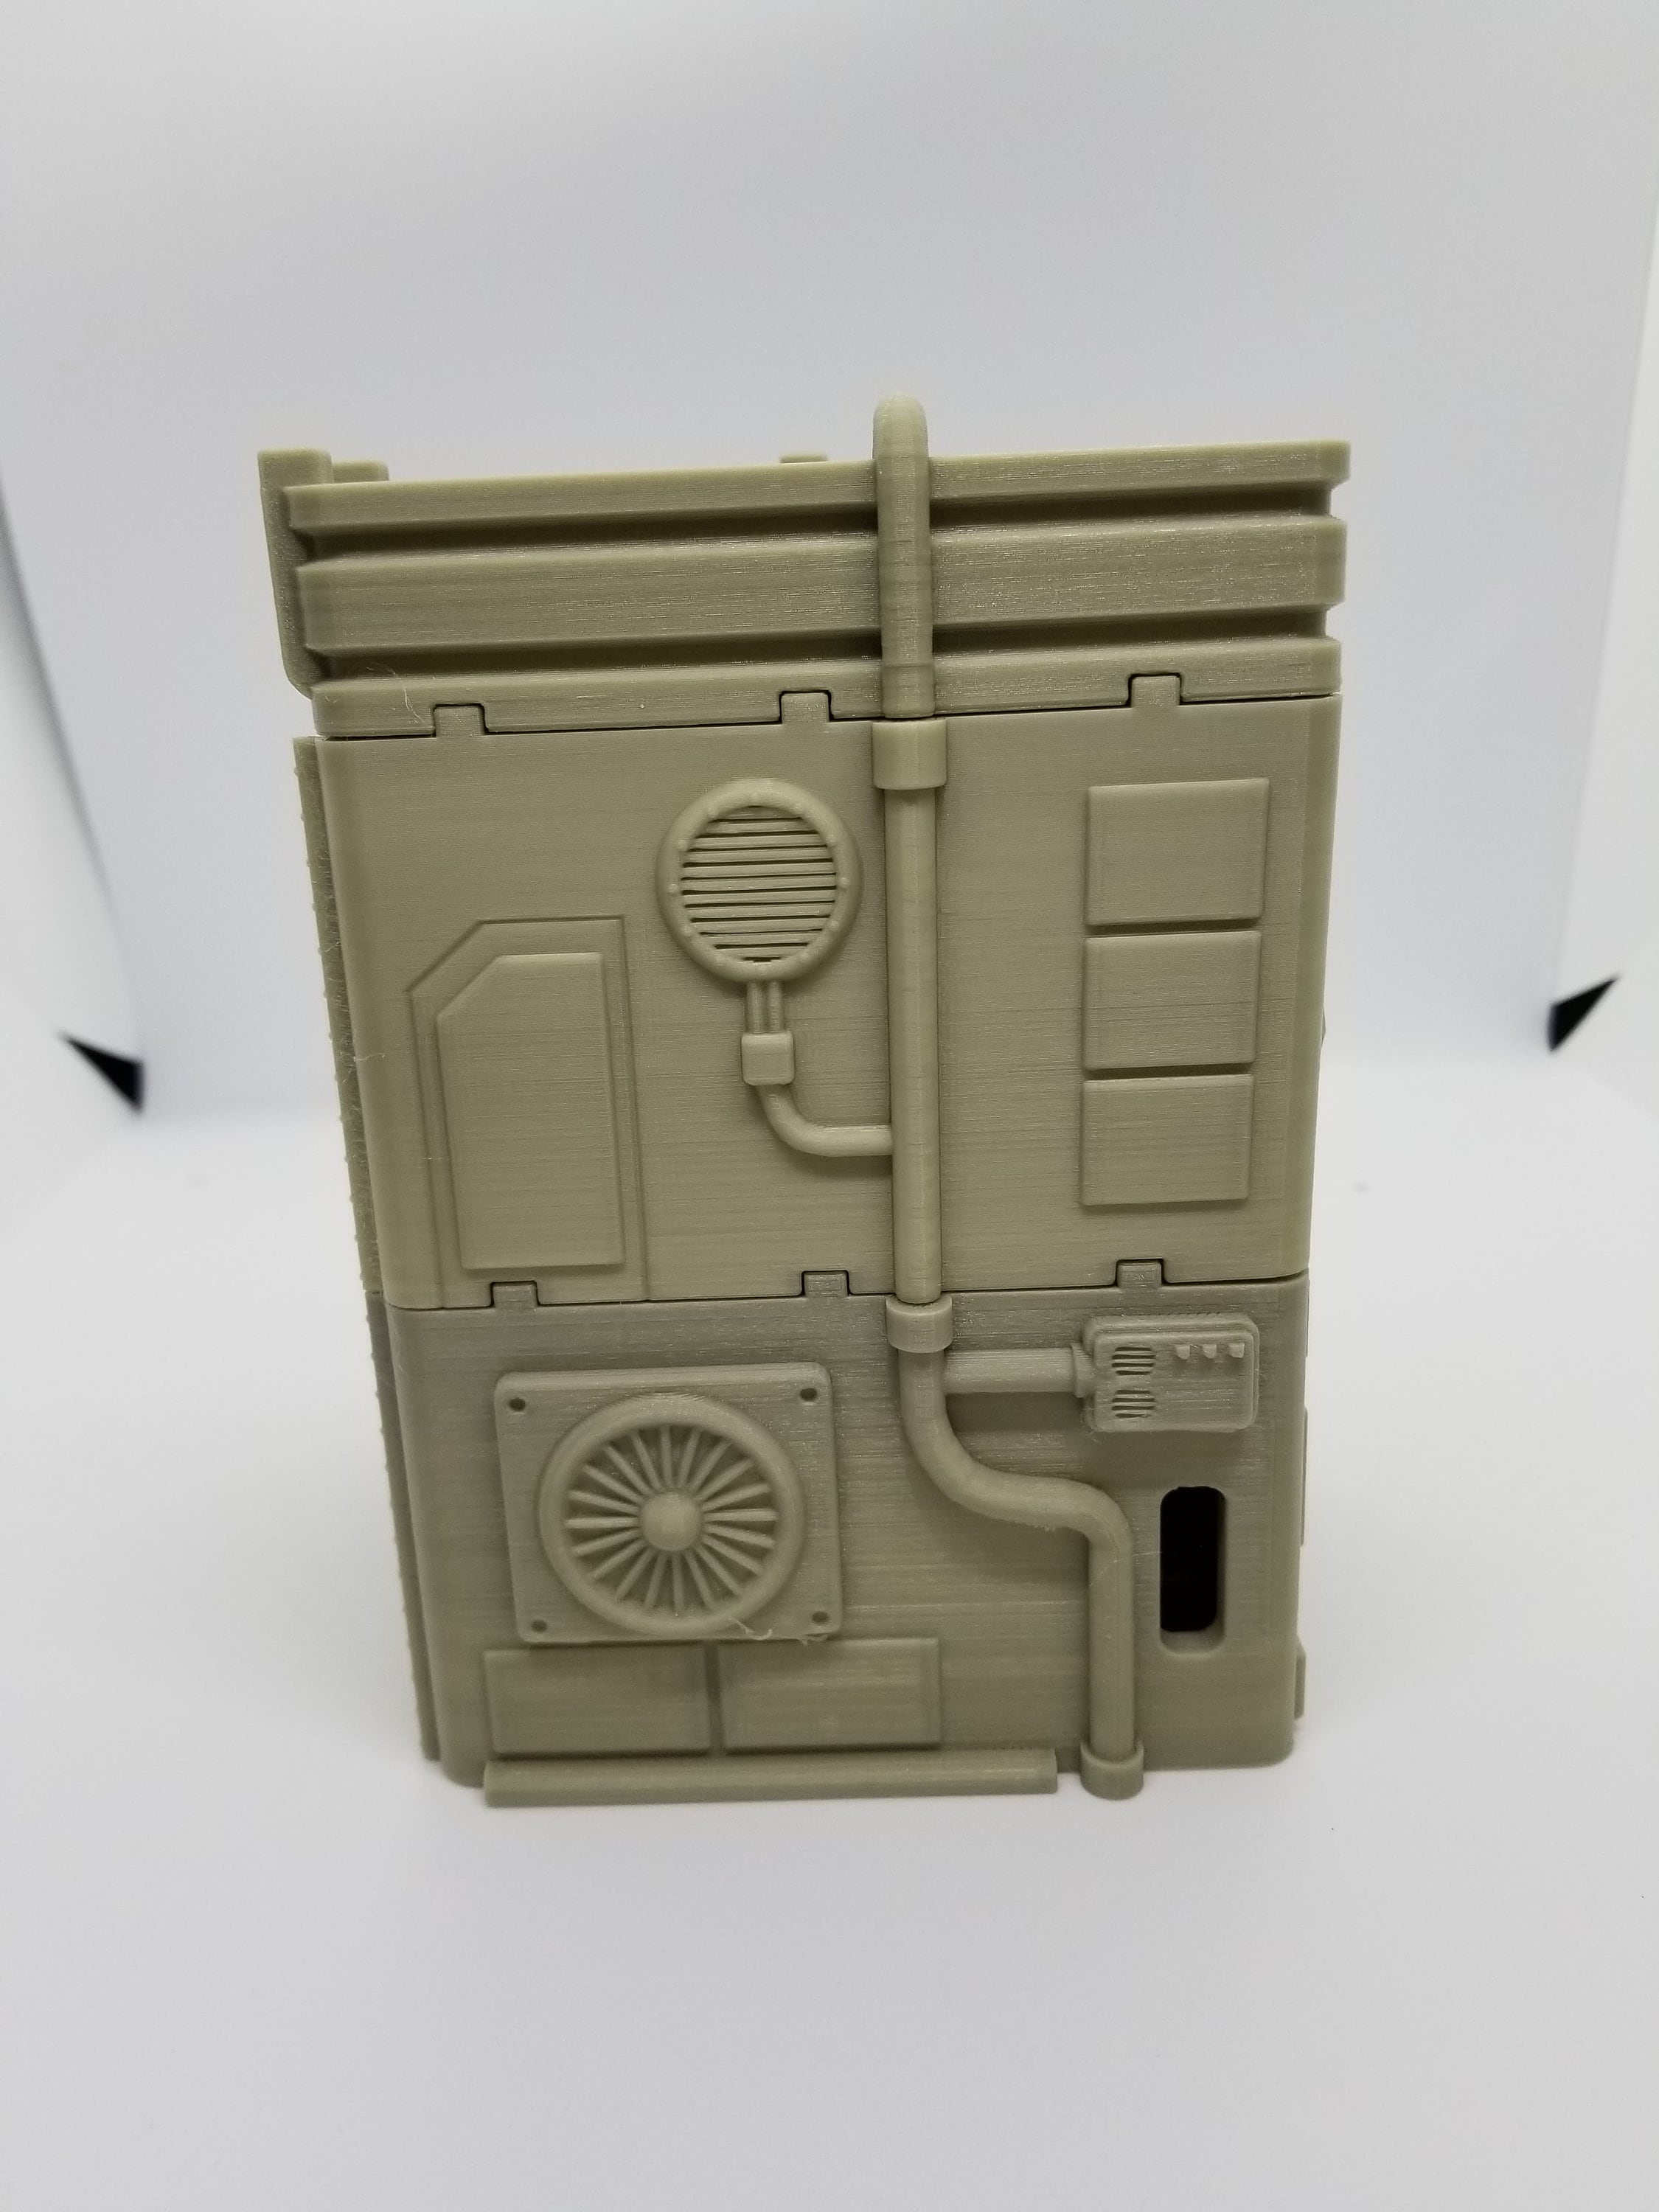 3d Printed Legion Compatible Small City House 2 / Corvus Games Terrain Licensed Printer / Print to Order